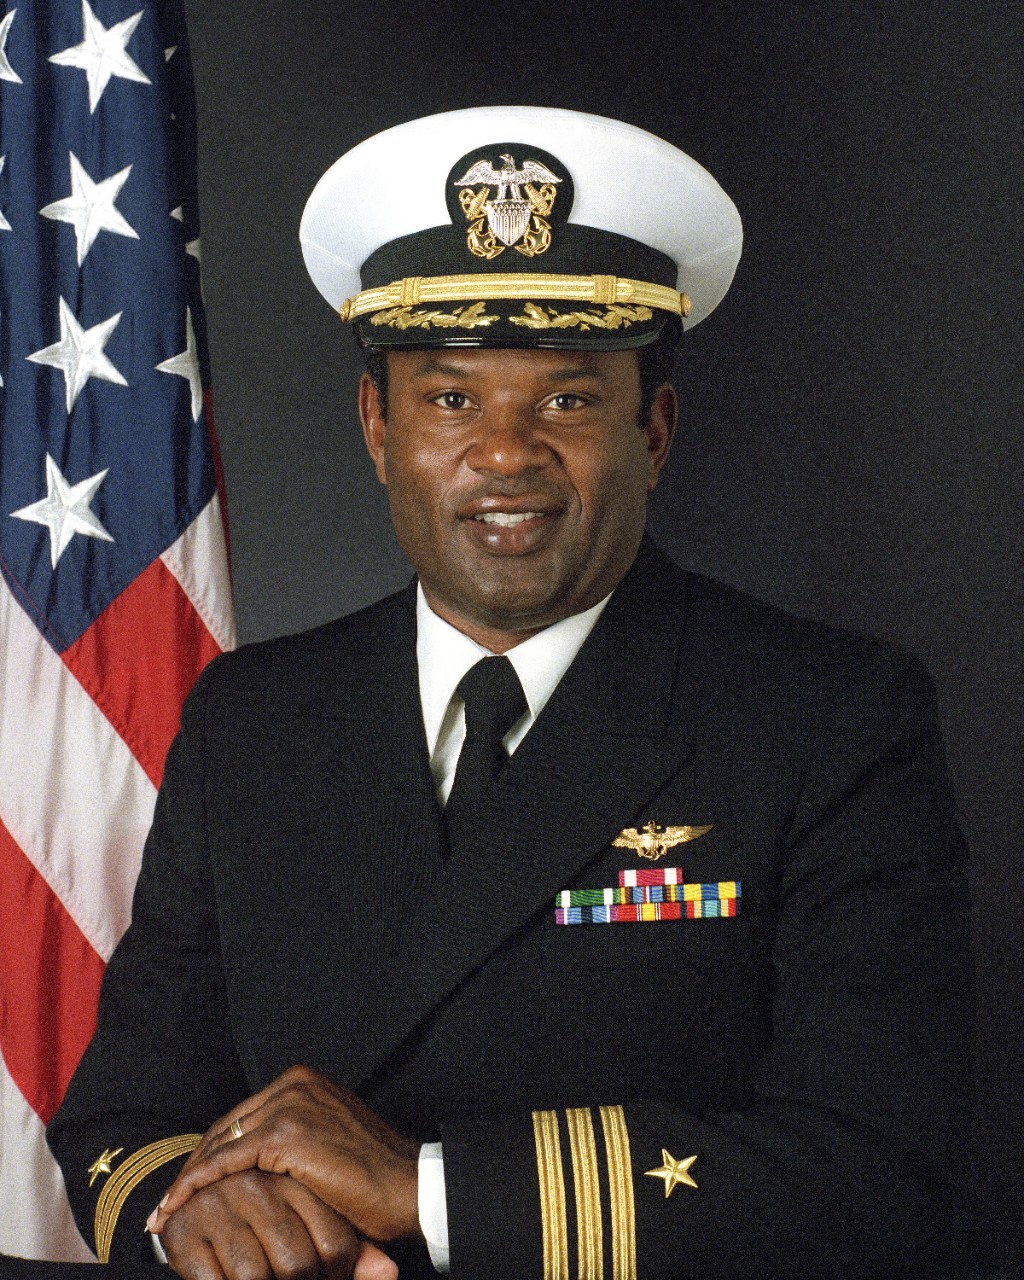 Portrait of an African-American man in Navy blue dress uniform, with the American flag displayed in background.